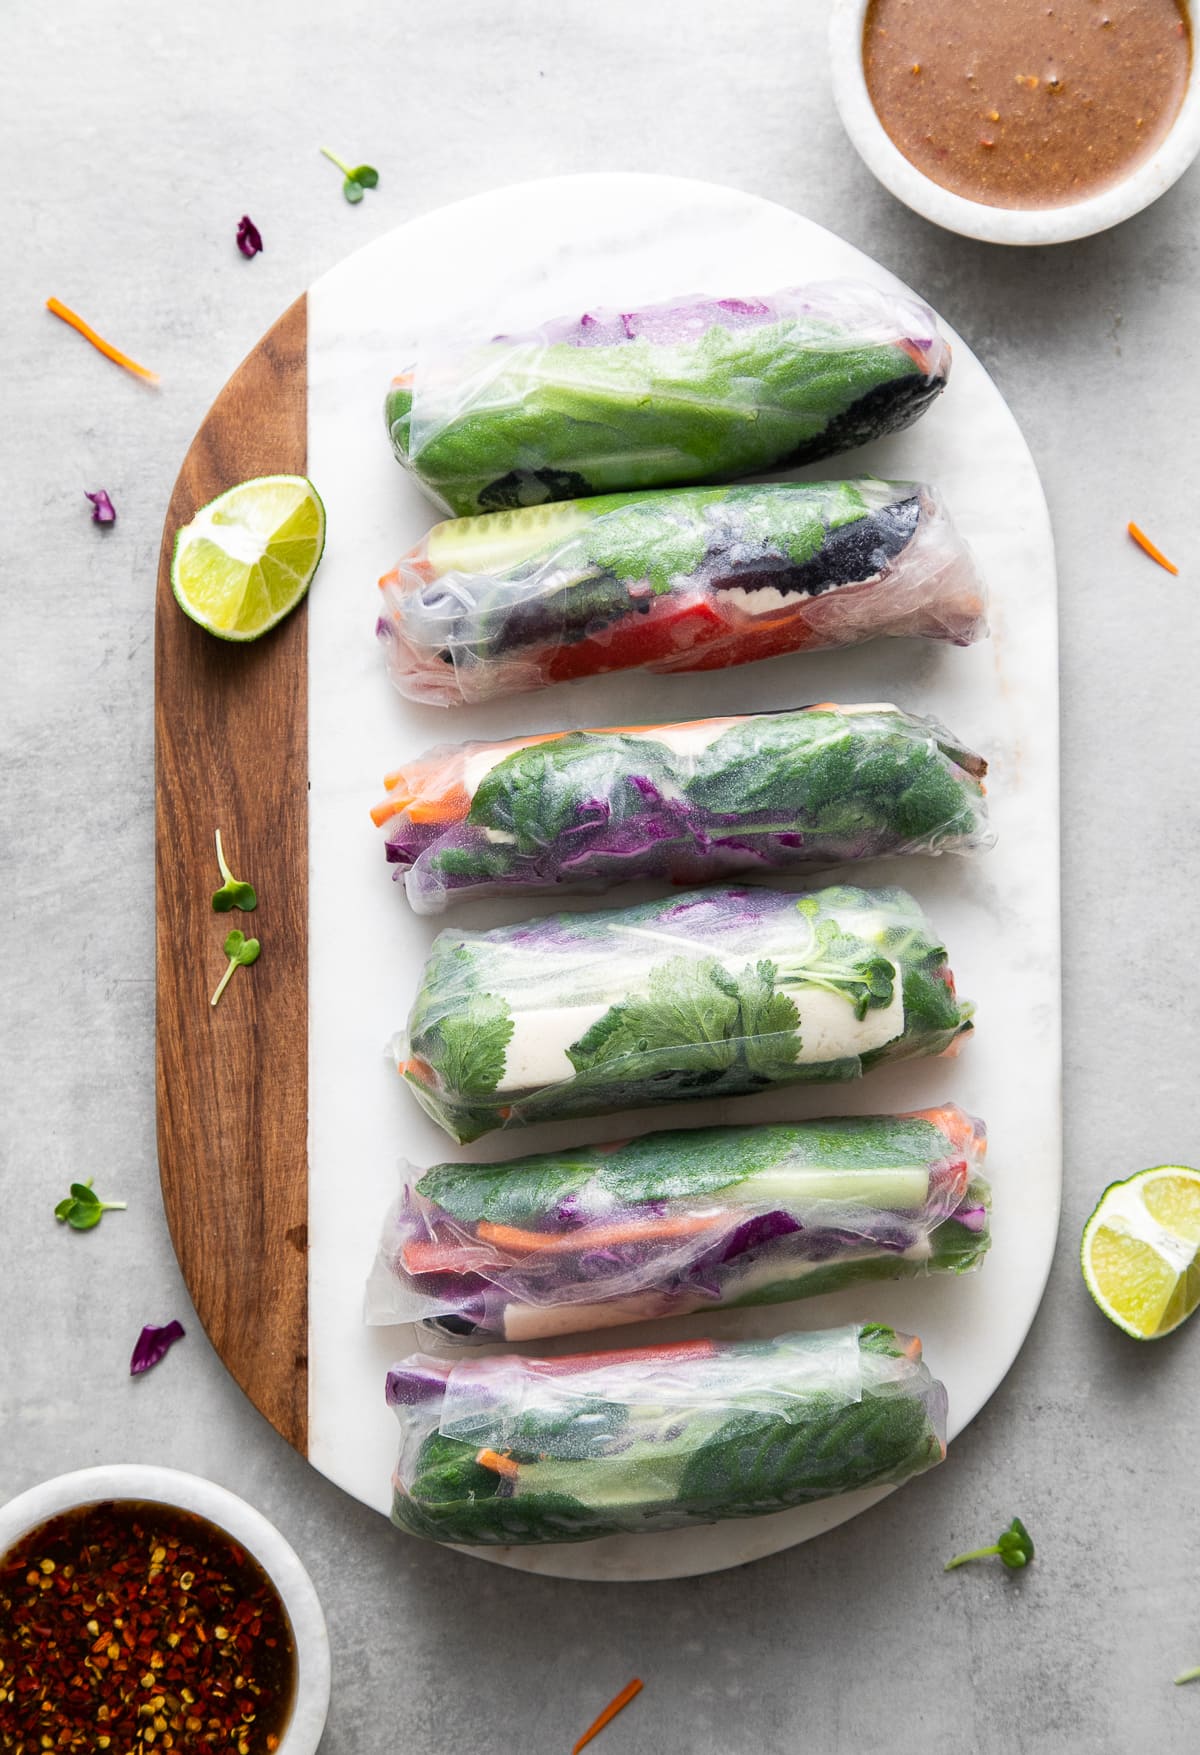 Summer Rolls + Two Dipping Sauces   The Simple Veganista